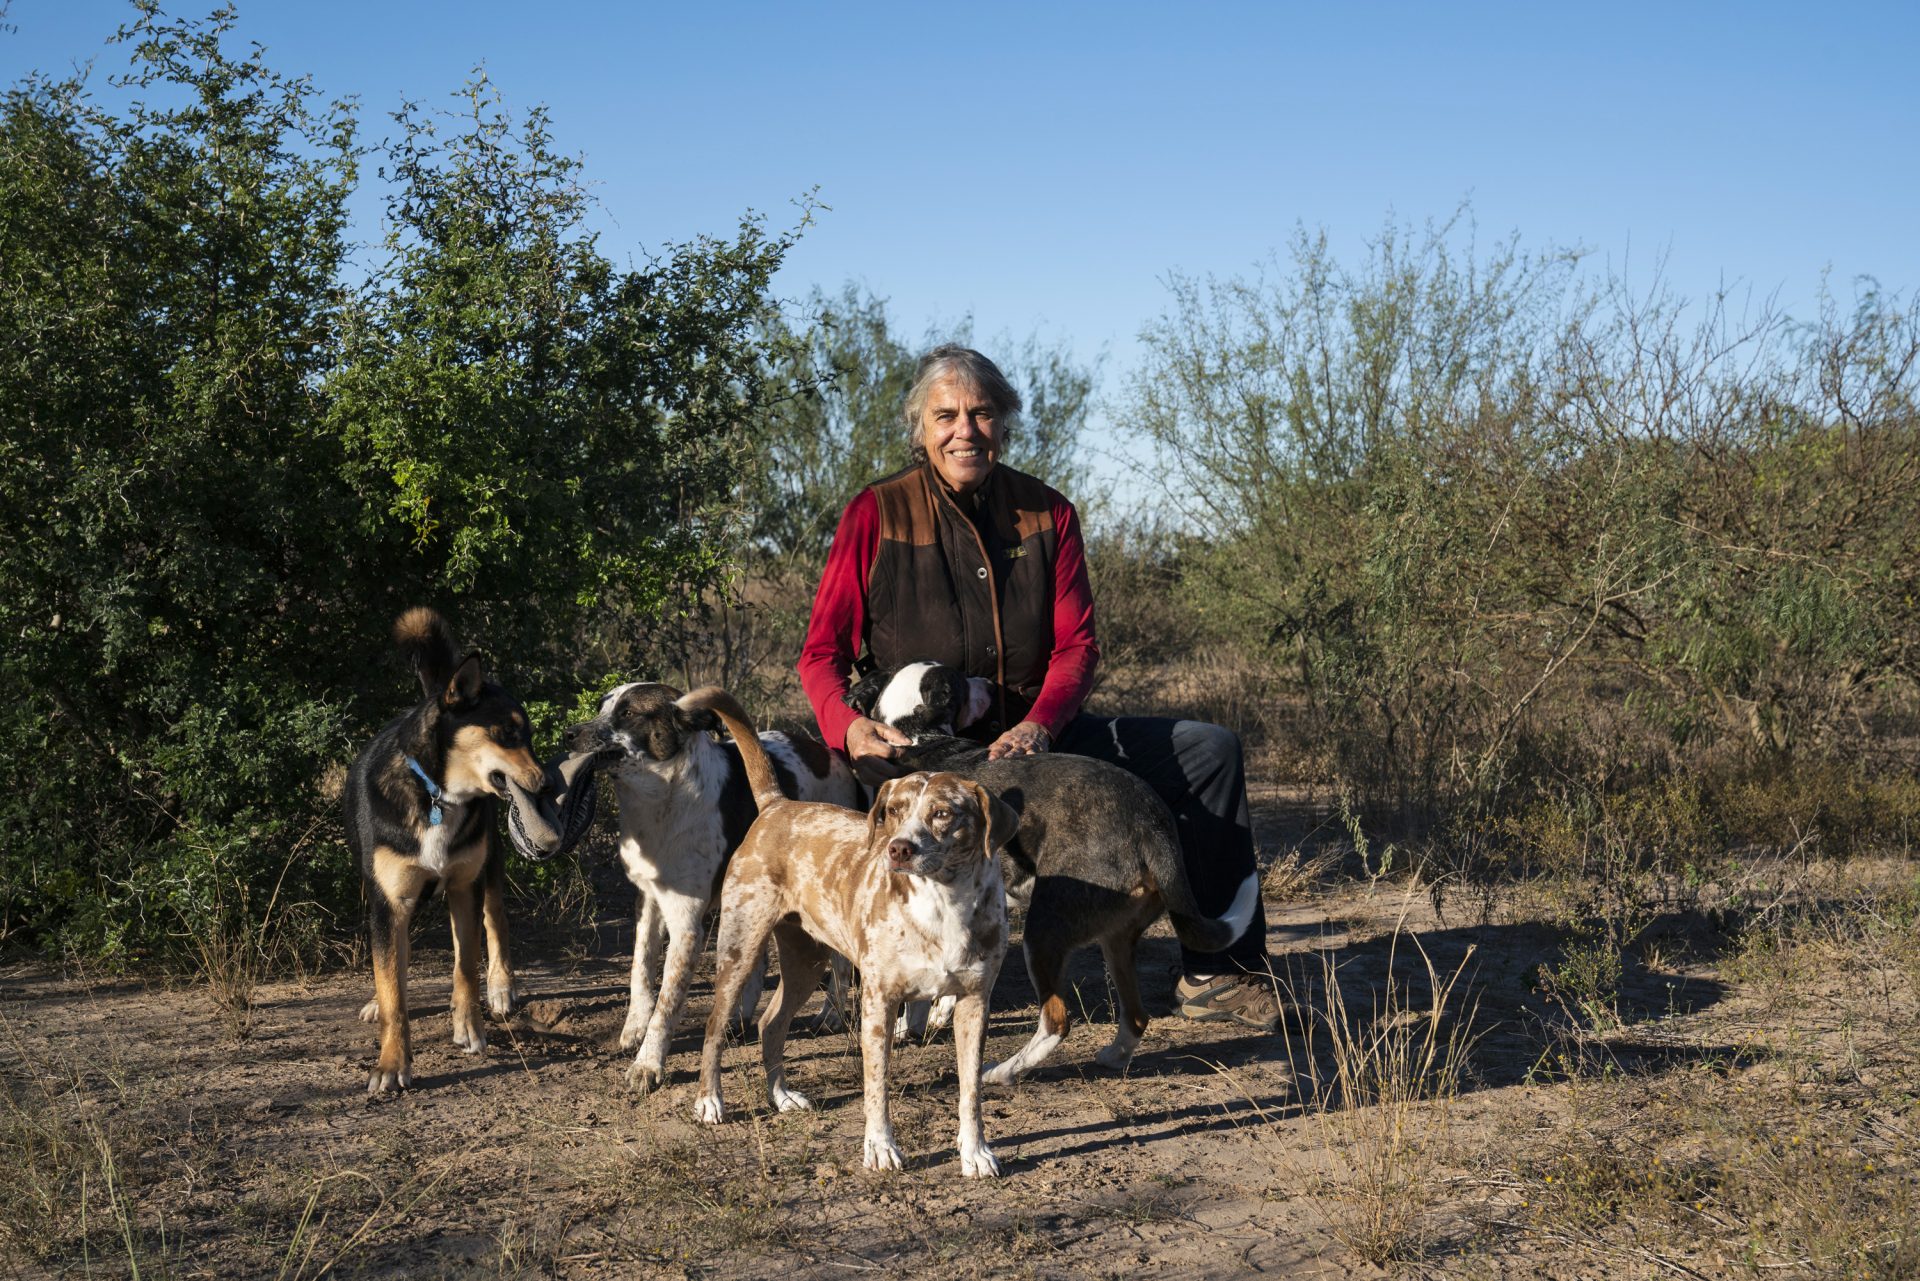 Betty Perez poses with her dogs in an area on her ranch that she is designating as a wildlife corridor. She is past president of the Friends of the Wildlife Corridor, which is adamantly opposed to the border wall.